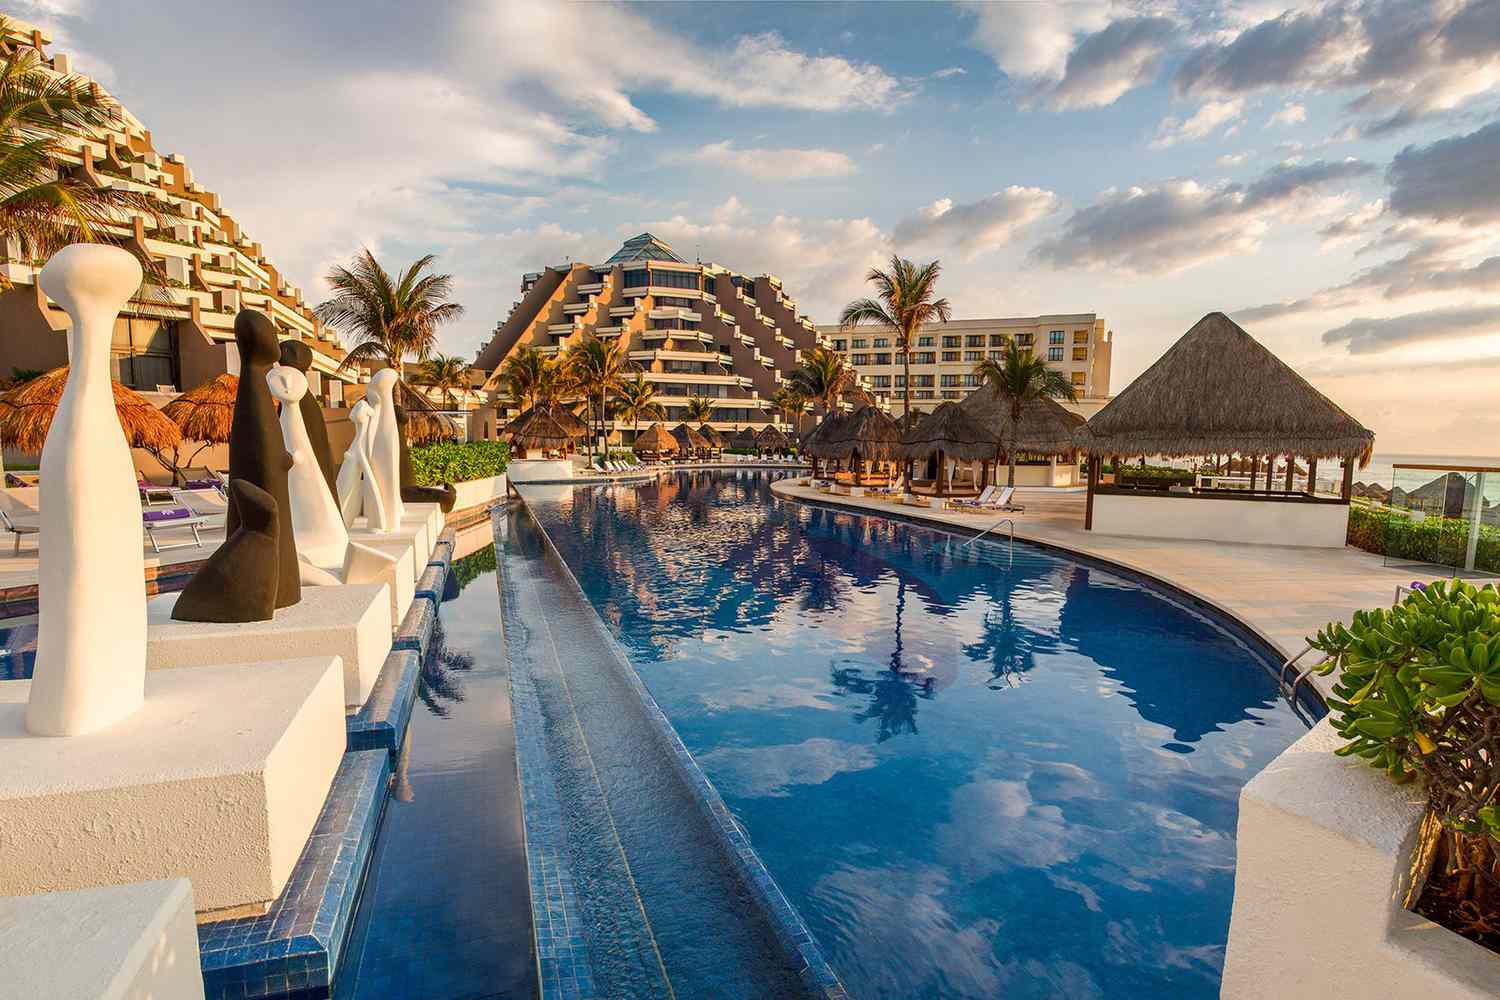 10 Best All-inclusive Resorts for Families in Mexico